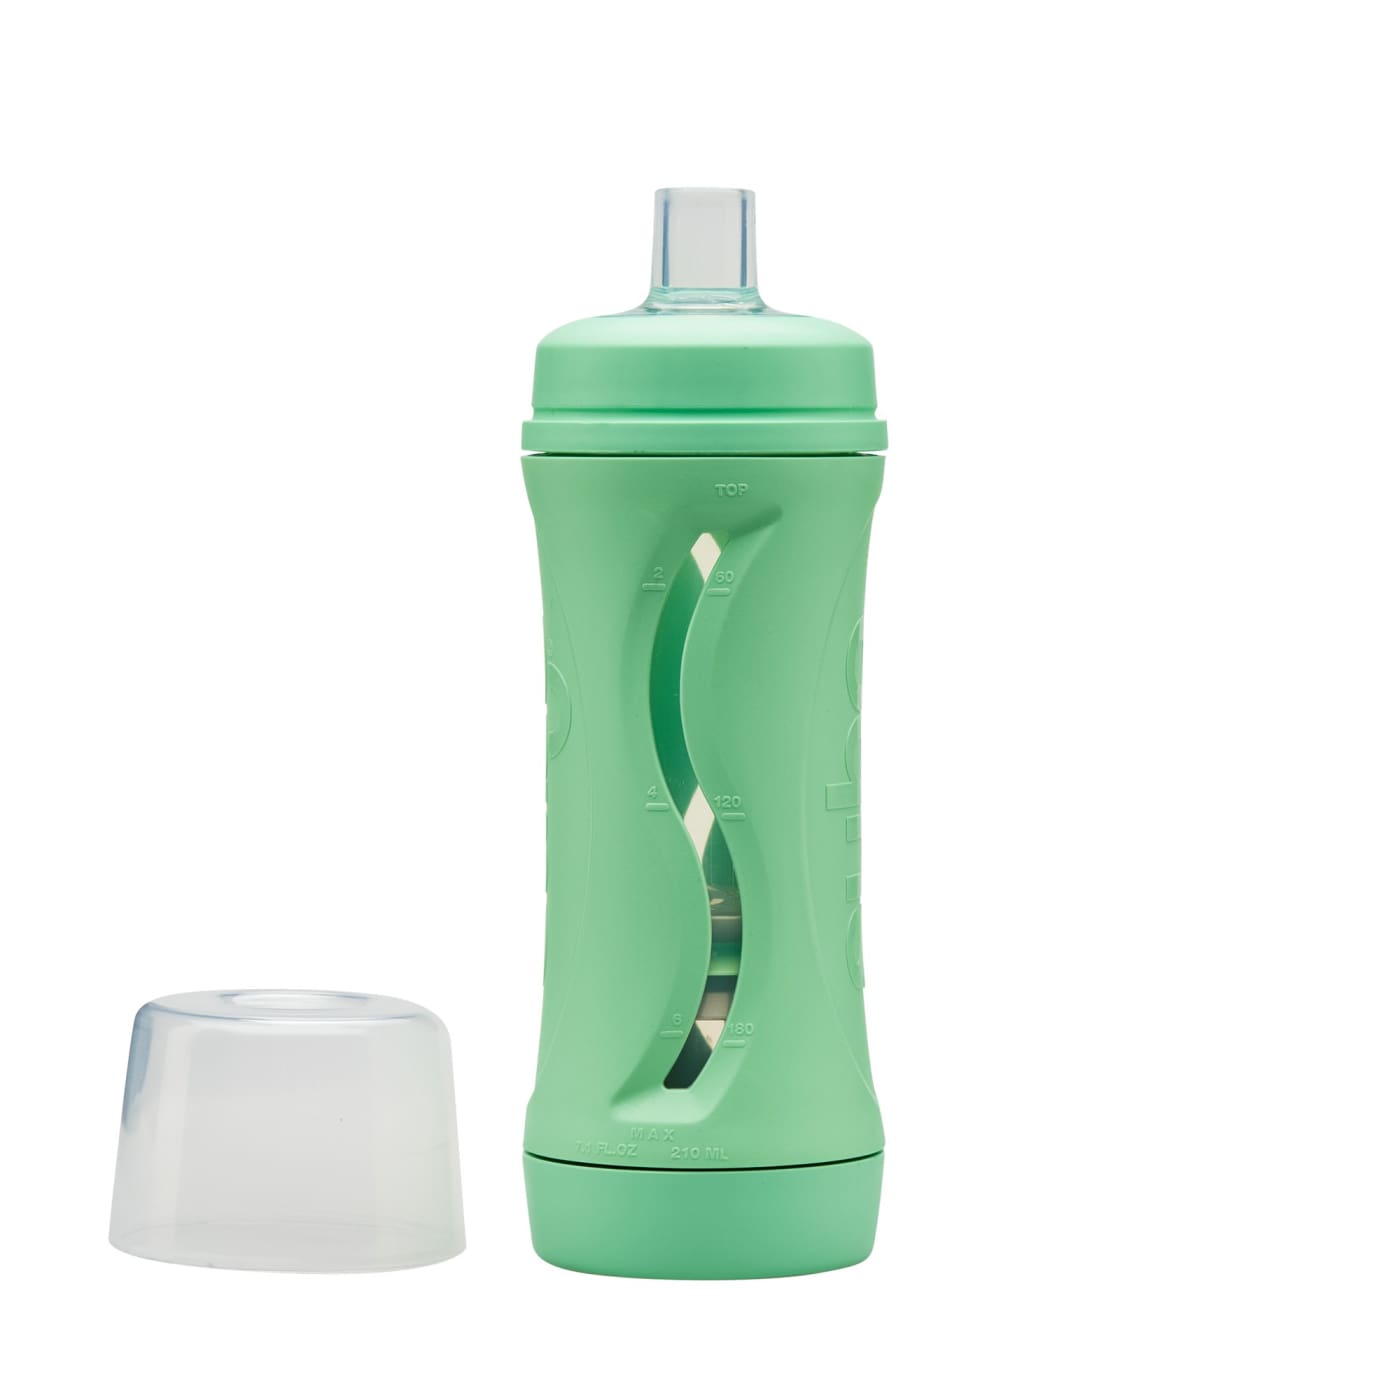 Subo The Food Bottle - Mint - Mint - NURSING & FEEDING - CONTAINERS/FEEDERS